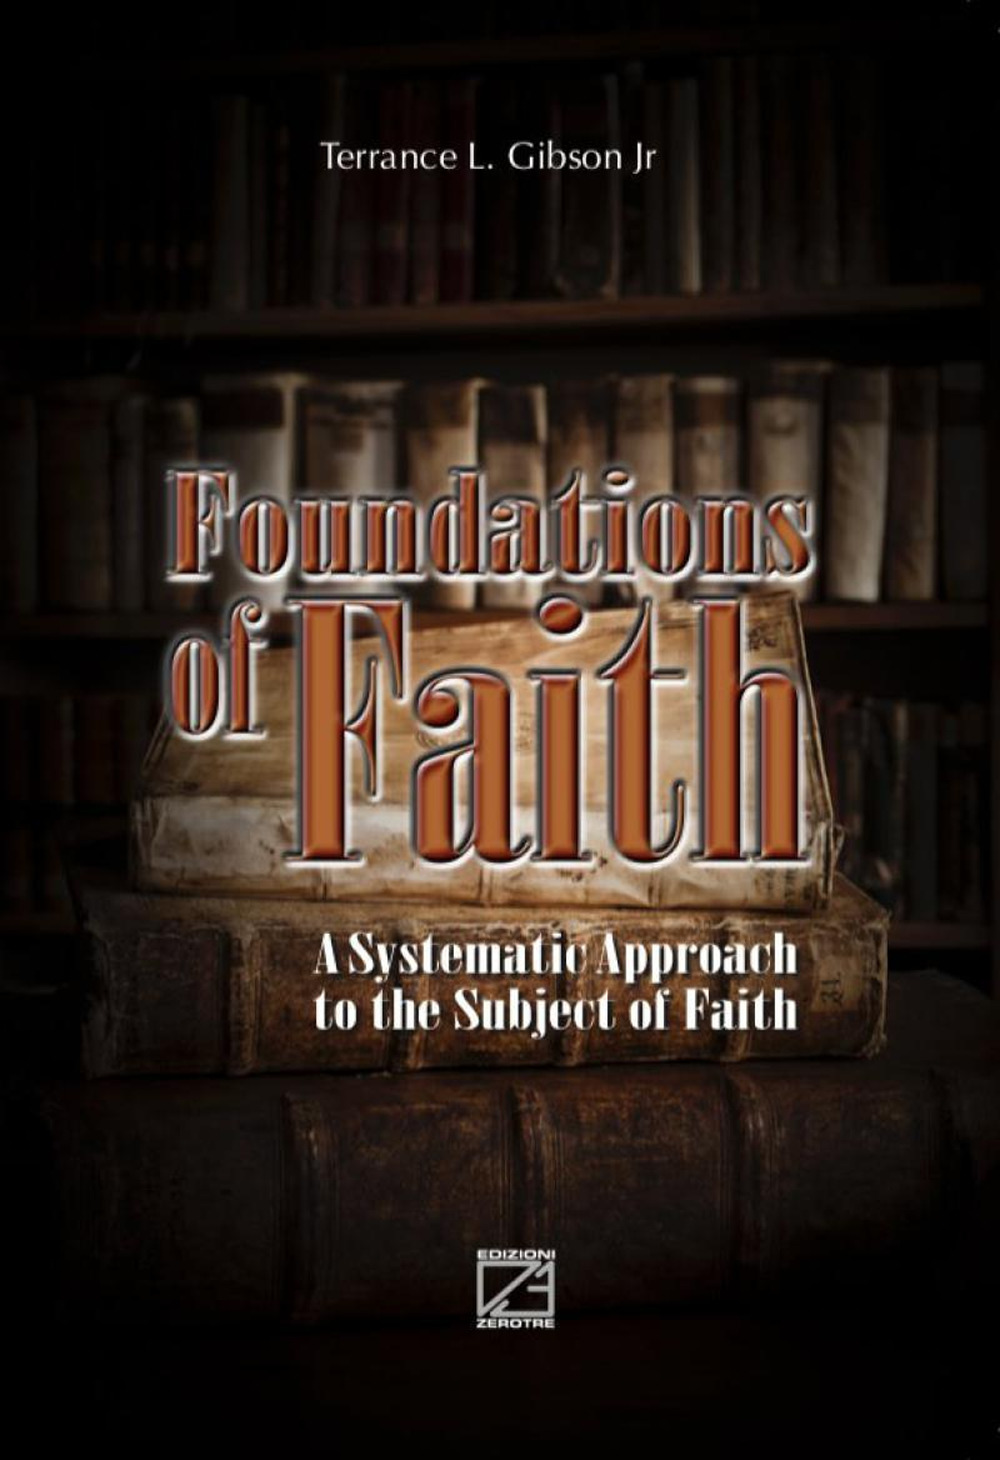 Foundations of faith. A systematic approach to the subject of Faith